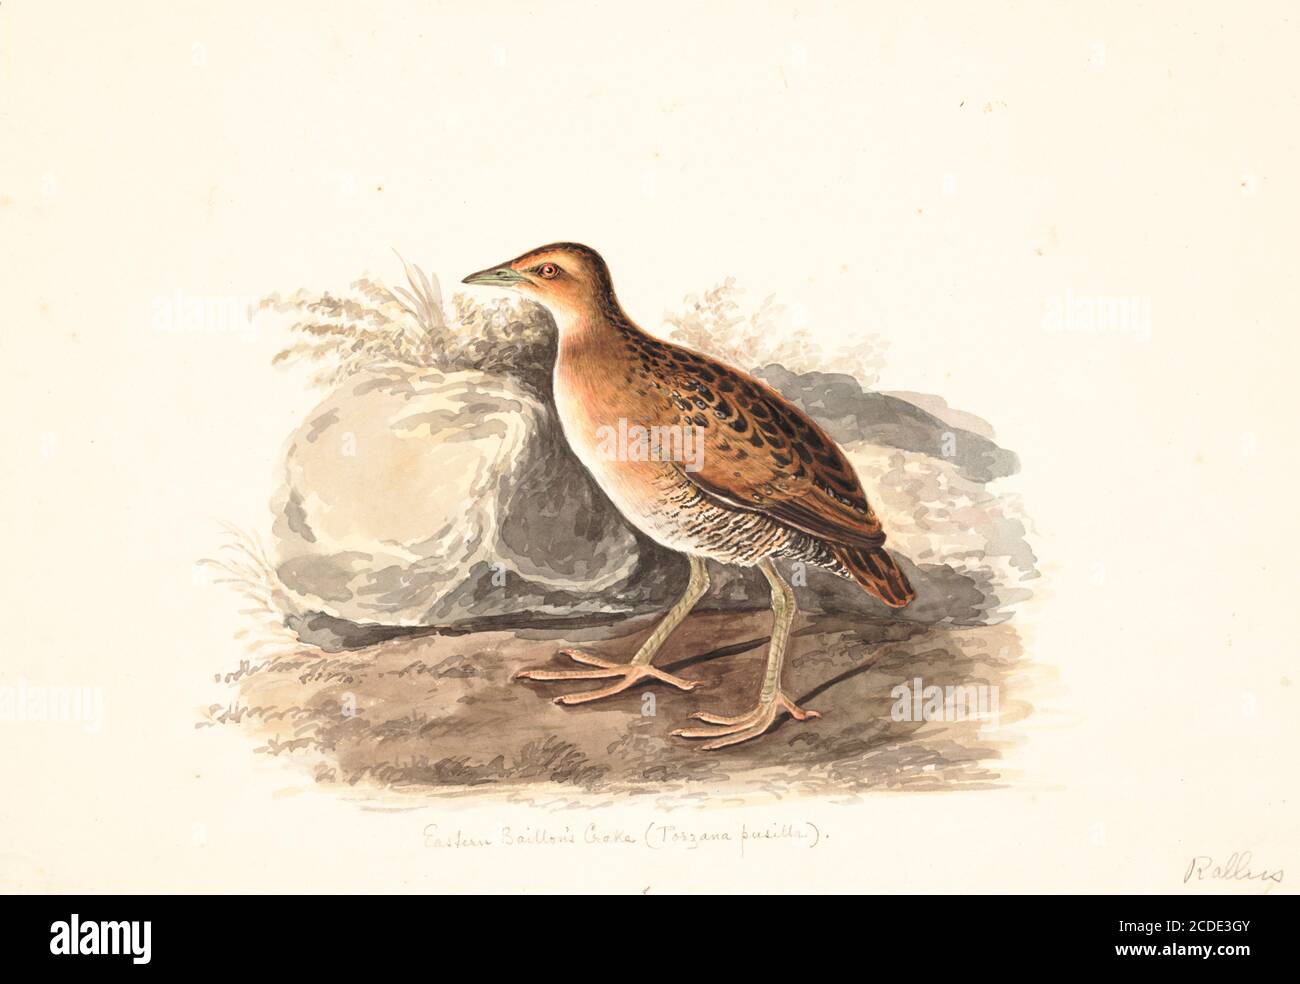 Baillon's crake (Zapornia pusilla here as Porzana pusilla) or the marsh crake, is a small waterbird of the family Rallidae. 18th century watercolor painting by Elizabeth Gwillim. Lady Elizabeth Symonds Gwillim (21 April 1763 – 21 December 1807) was an artist married to Sir Henry Gwillim, Puisne Judge at the Madras high court until 1808. Lady Gwillim painted a series of about 200 watercolours of Indian birds. Produced about 20 years before John James Audubon, her work has been acclaimed for its accuracy and natural postures as they were drawn from observations of the birds in life. She also pai Stock Photo